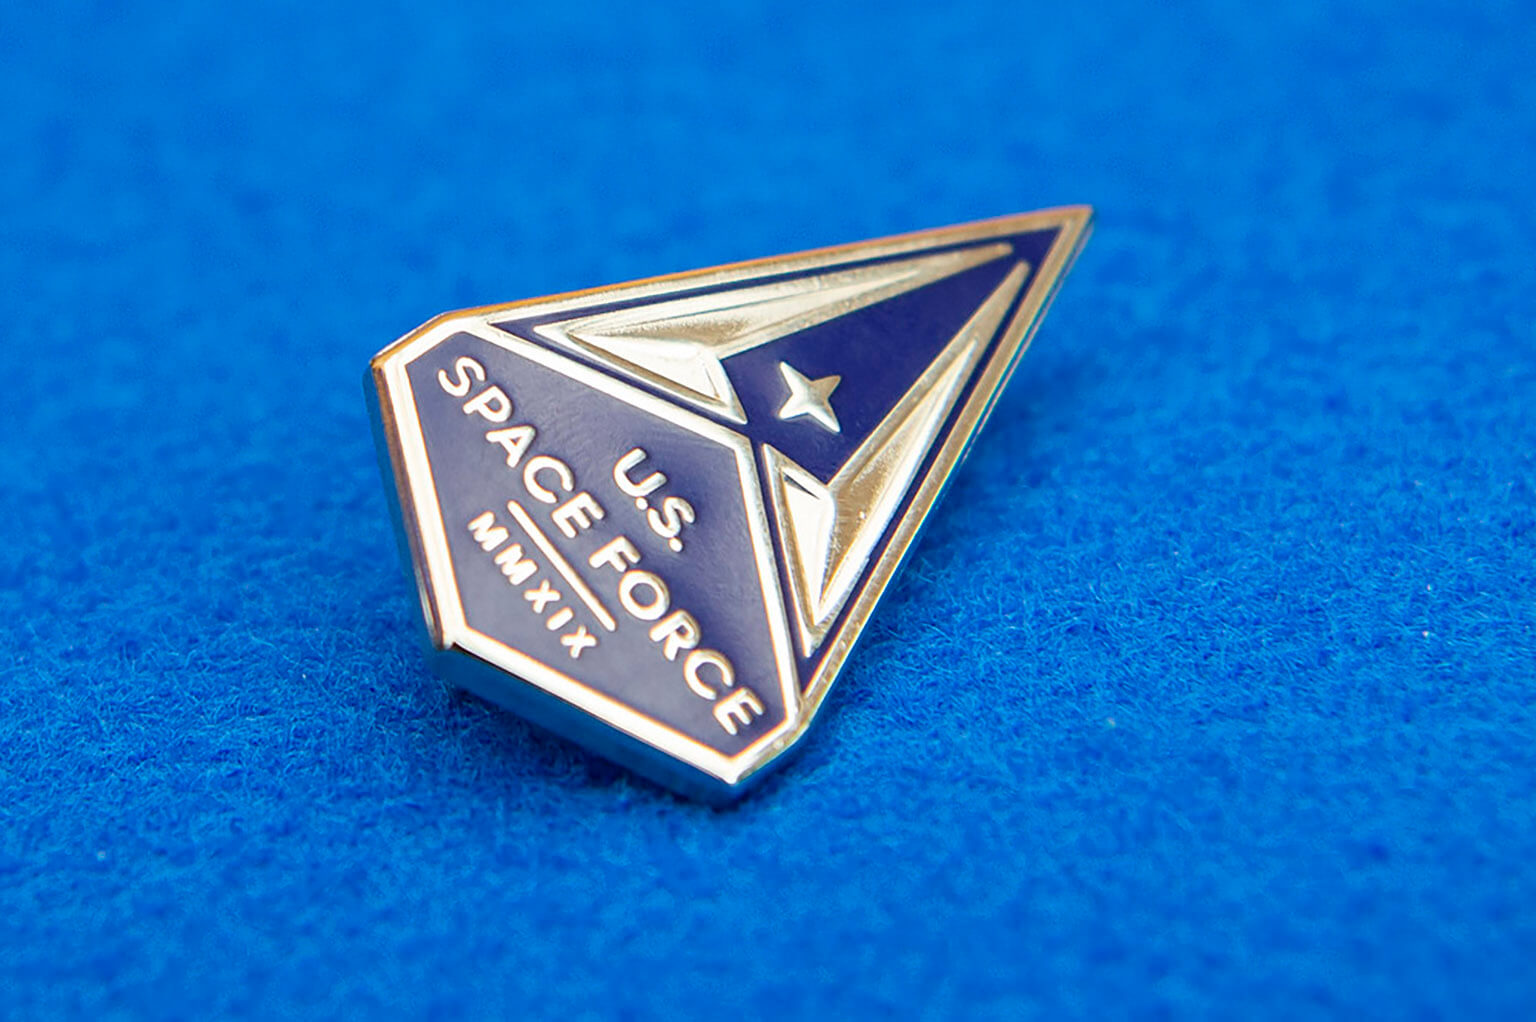 US Space Command badge